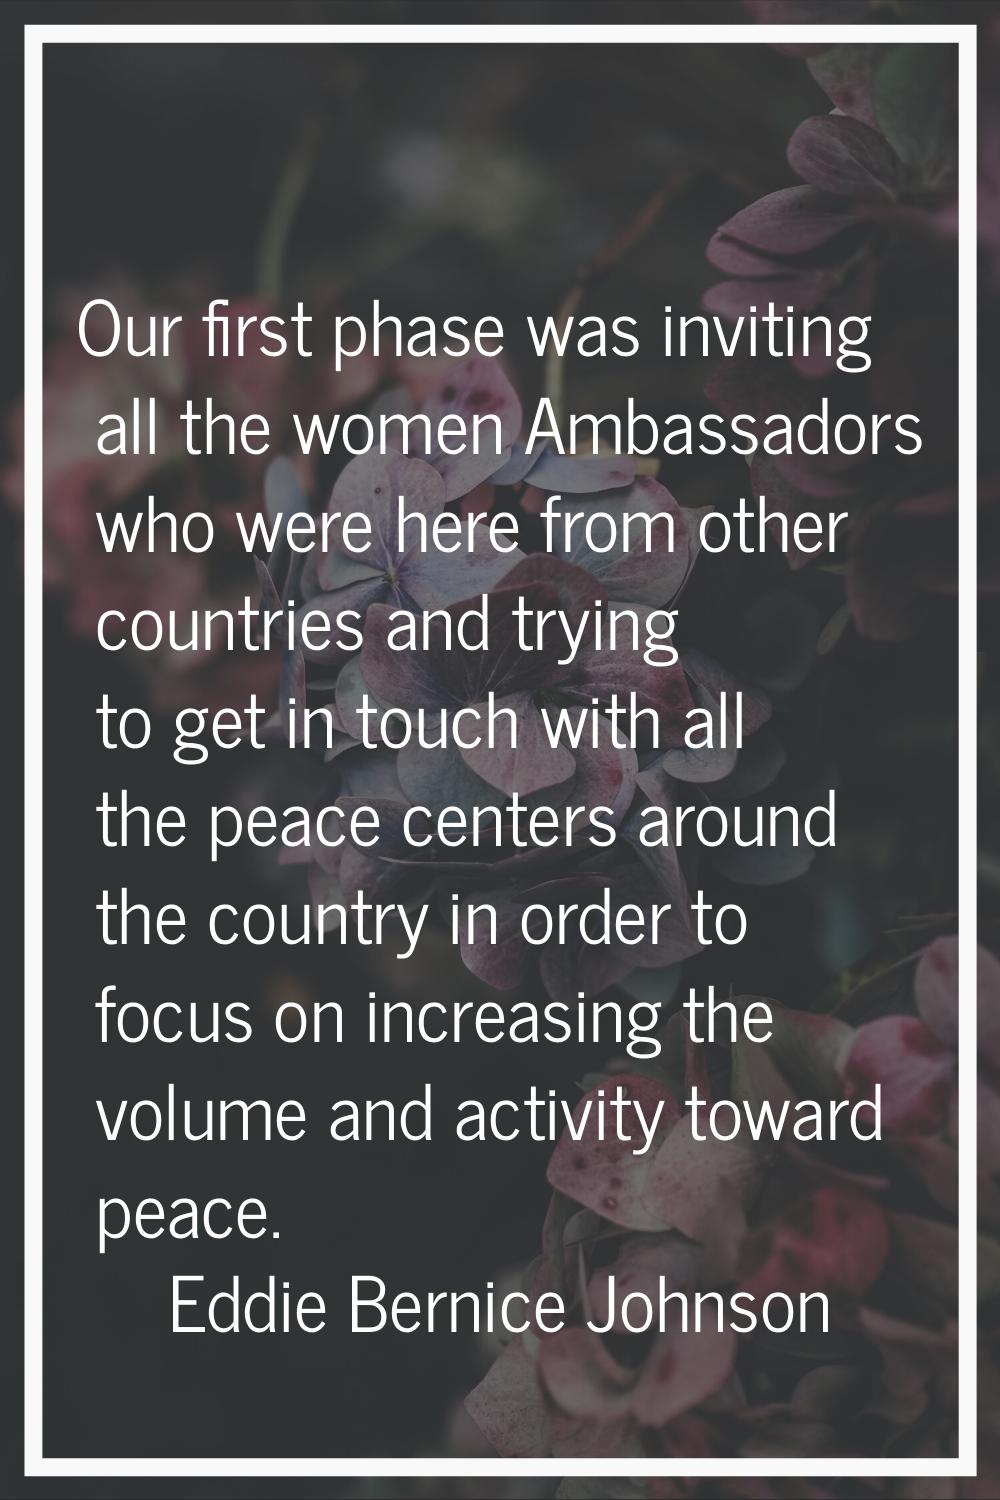 Our first phase was inviting all the women Ambassadors who were here from other countries and tryin